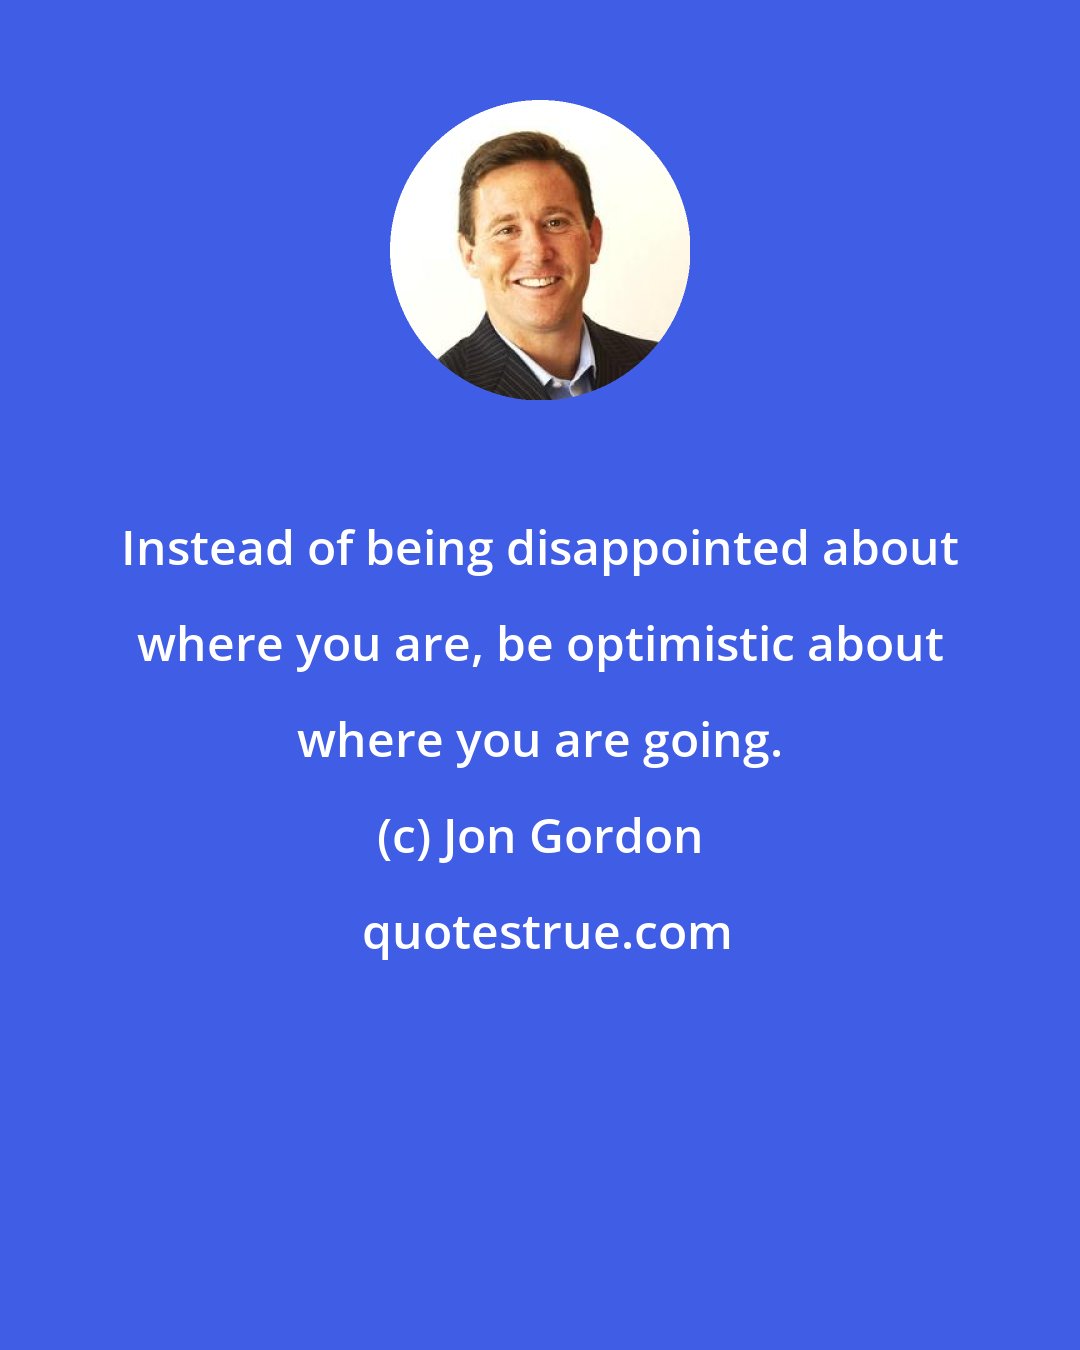 Jon Gordon: Instead of being disappointed about where you are, be optimistic about where you are going.